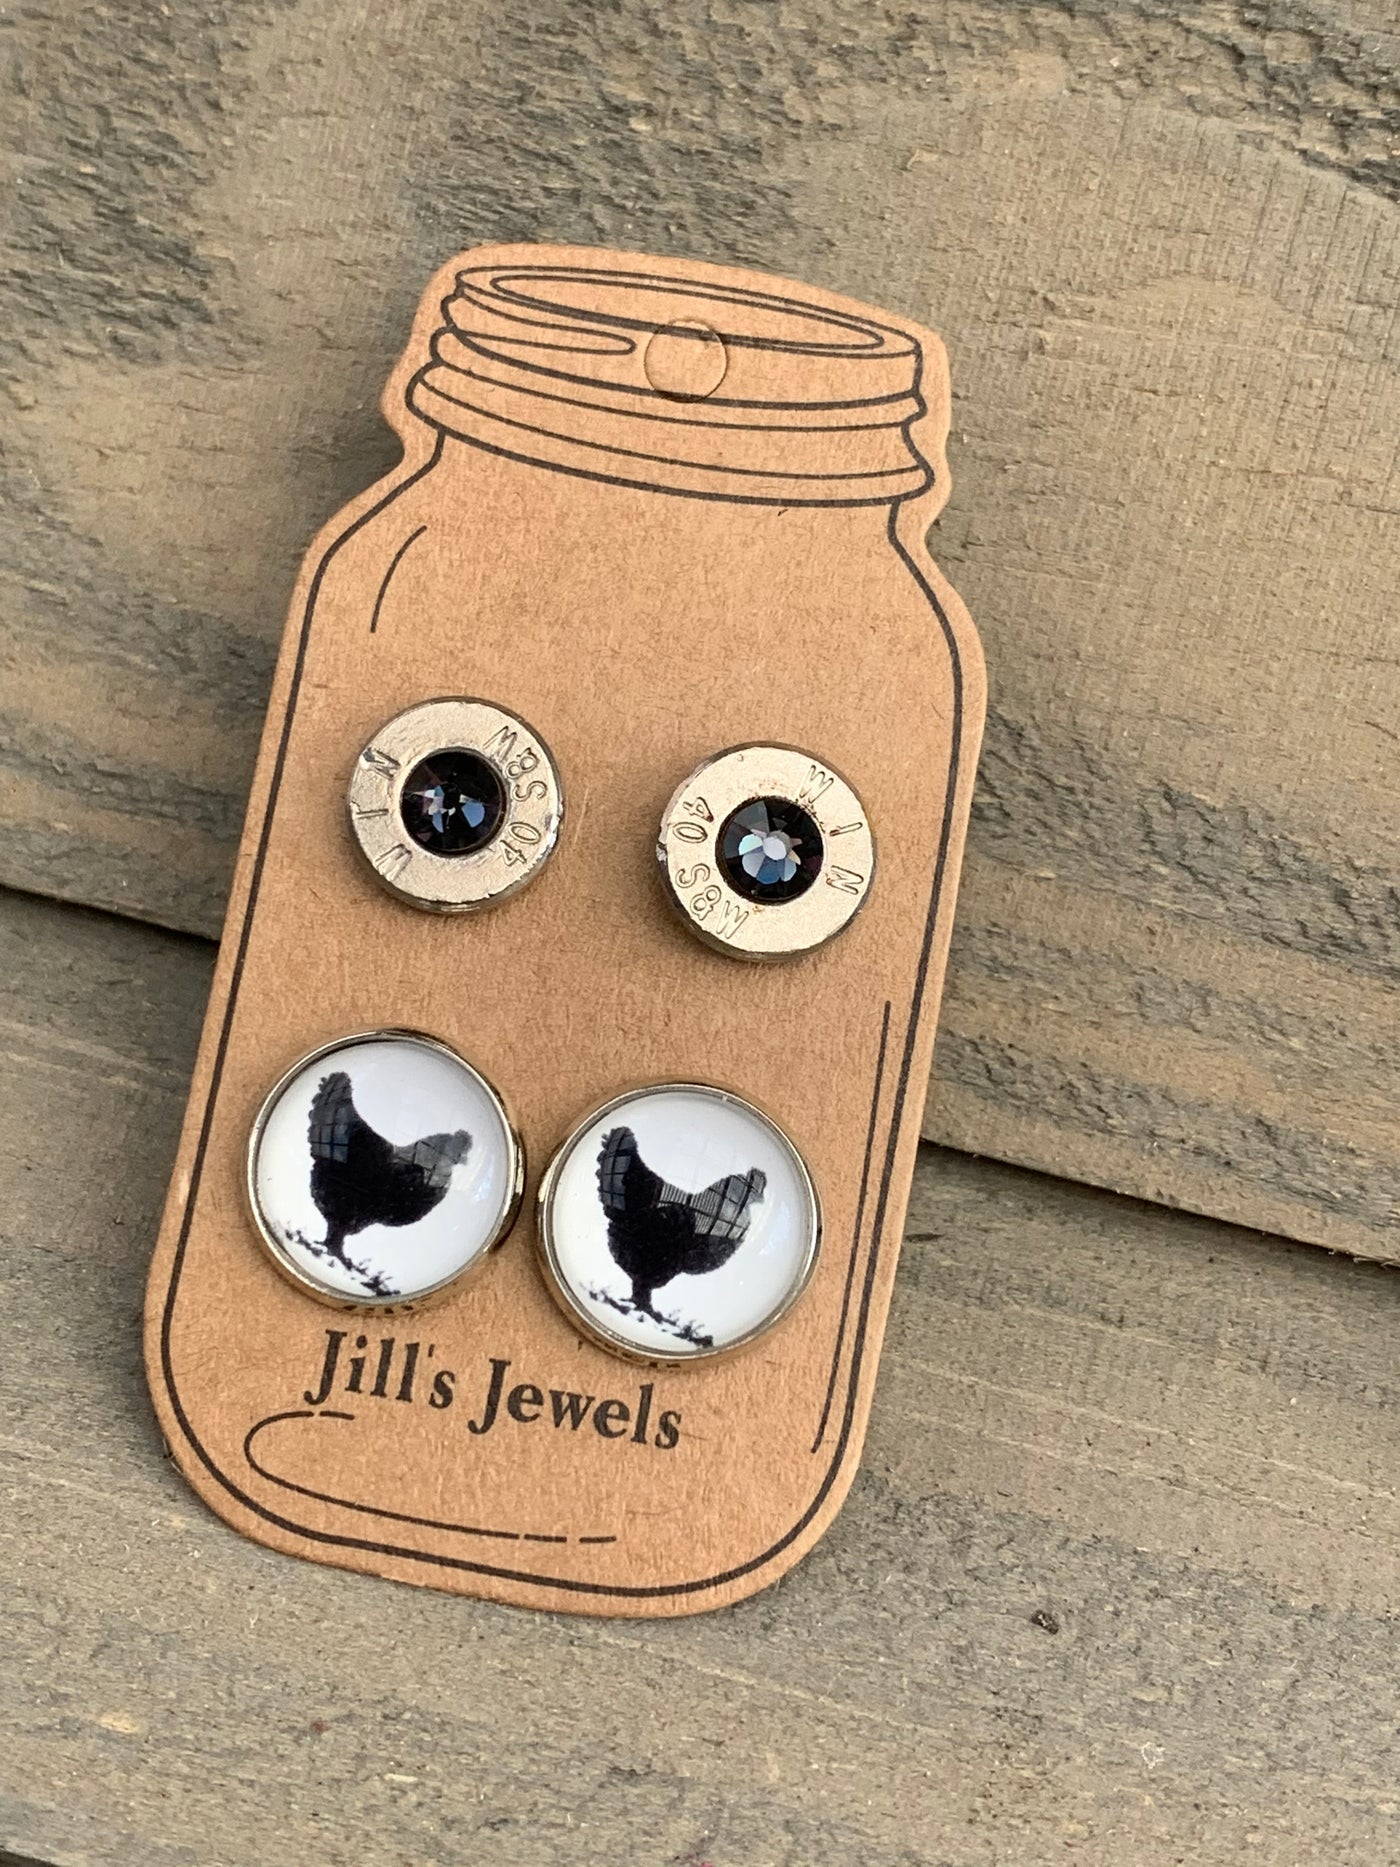 Chicken 40 Caliber bullet earring set - Jill's Jewels | Unique, Handcrafted, Trendy, And Fun Jewelry